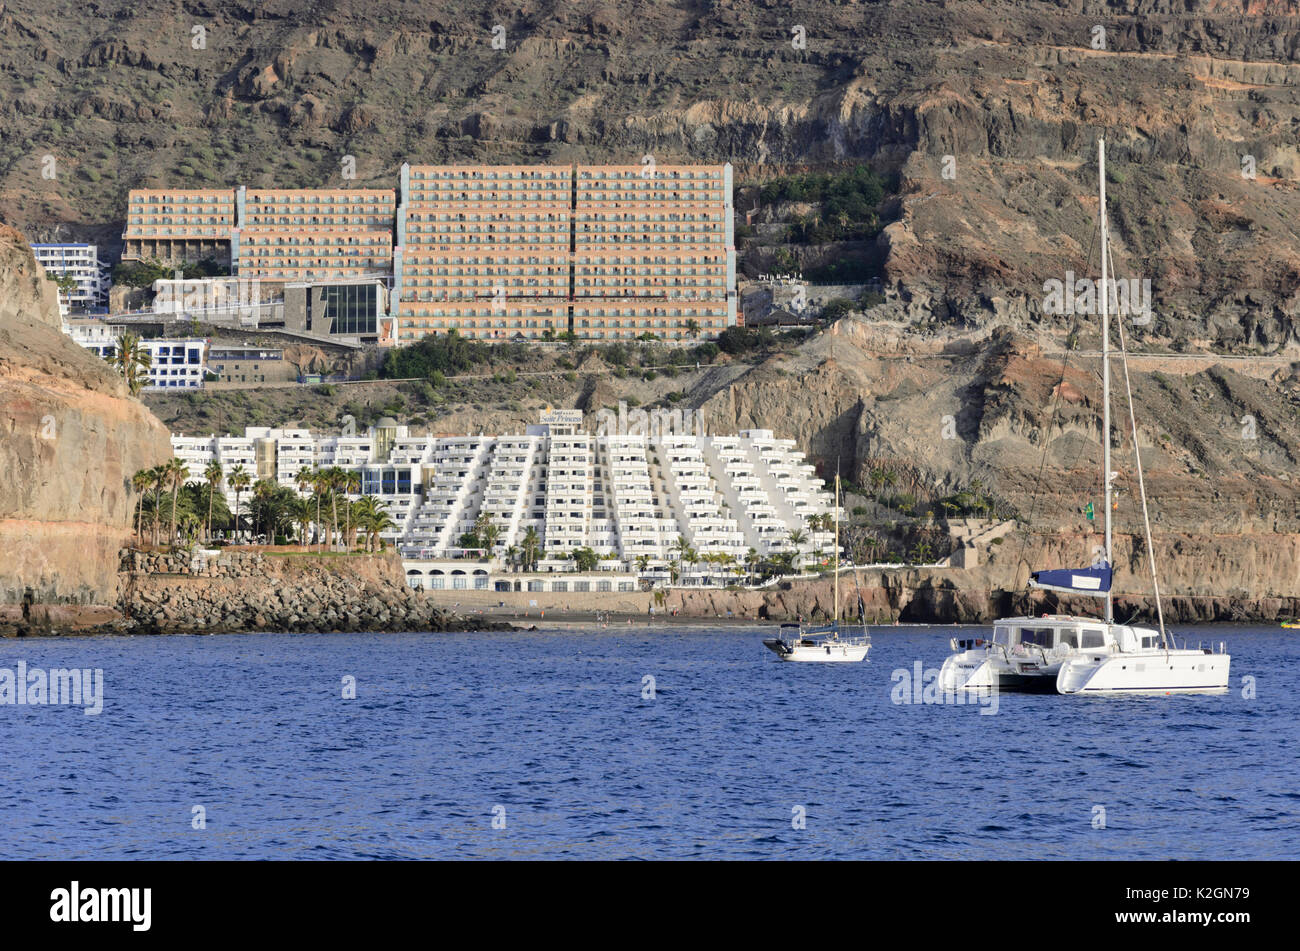 Hillside with hotels and holiday villages, Taurito, Gran Canaria, Spain Stock Photo